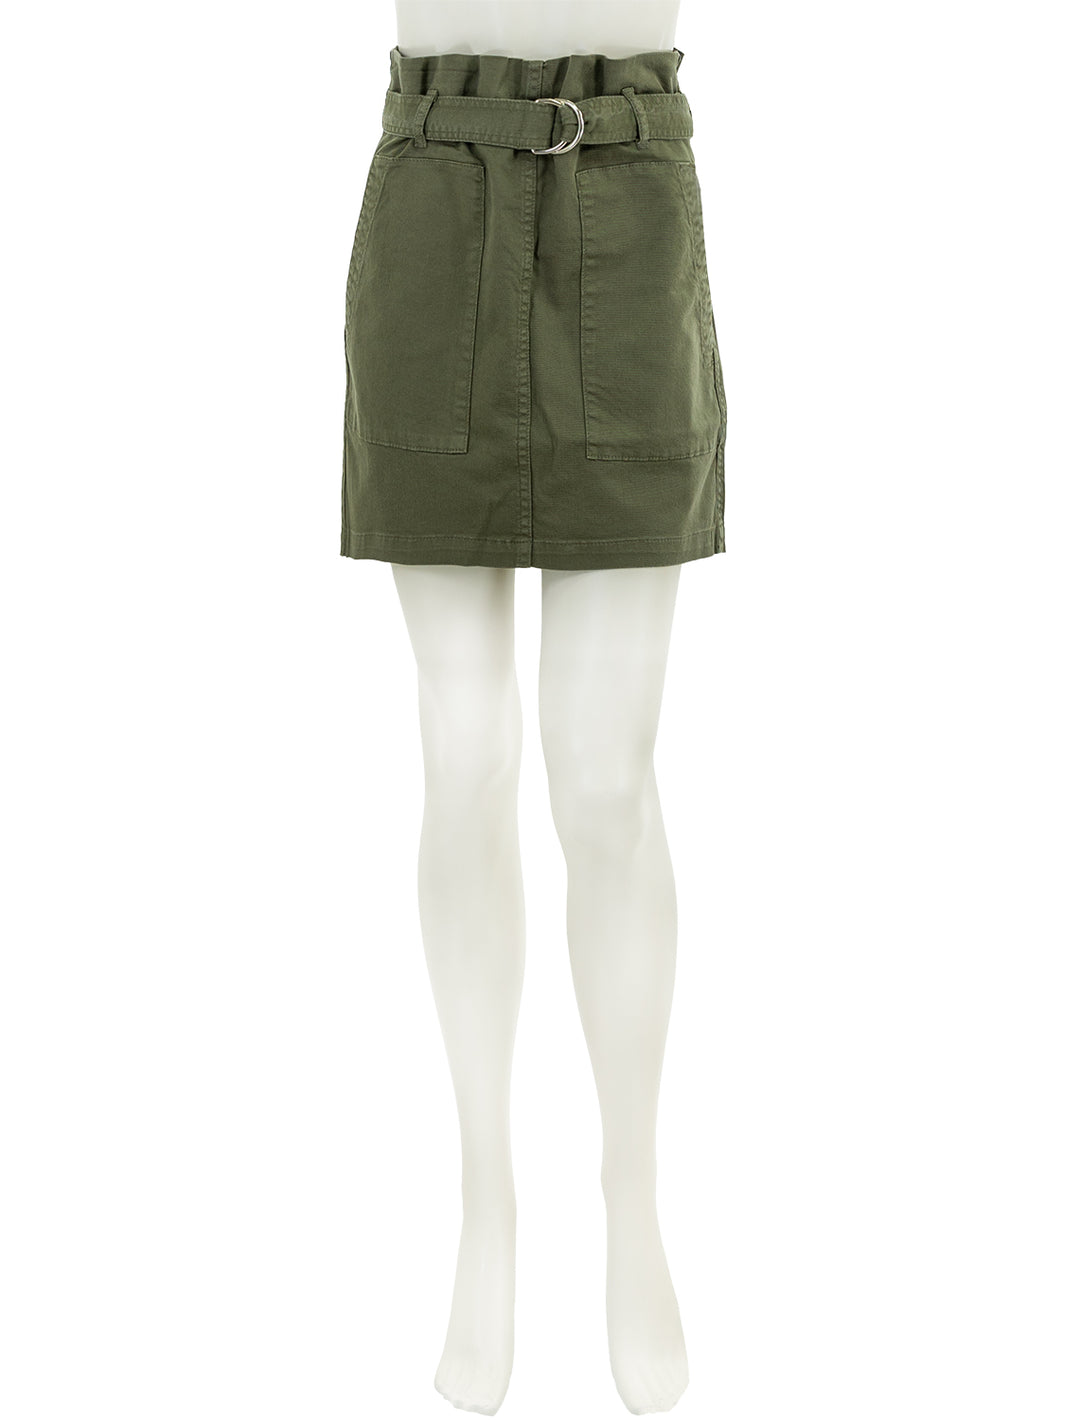 Front view of Anine Bing's aveline skirt in army green.